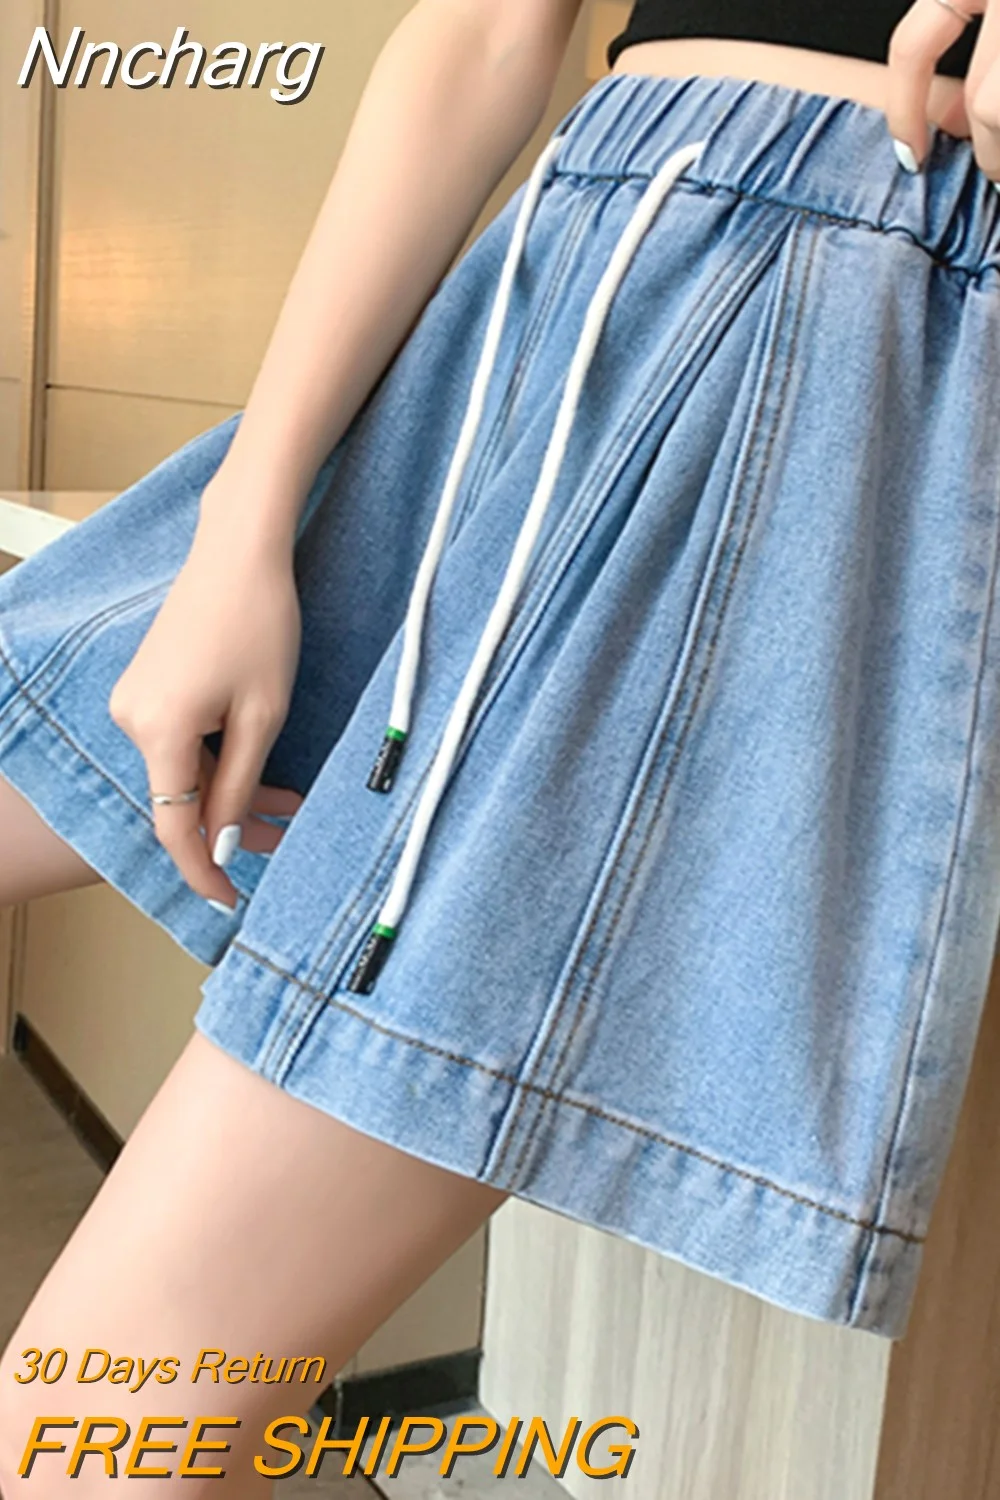 Nncharge New Summer Elastic High Waist Denim Shorts Women Casual Lace-up Wide Leg Jean Shorts Lady Fashion Solid Color Shorts